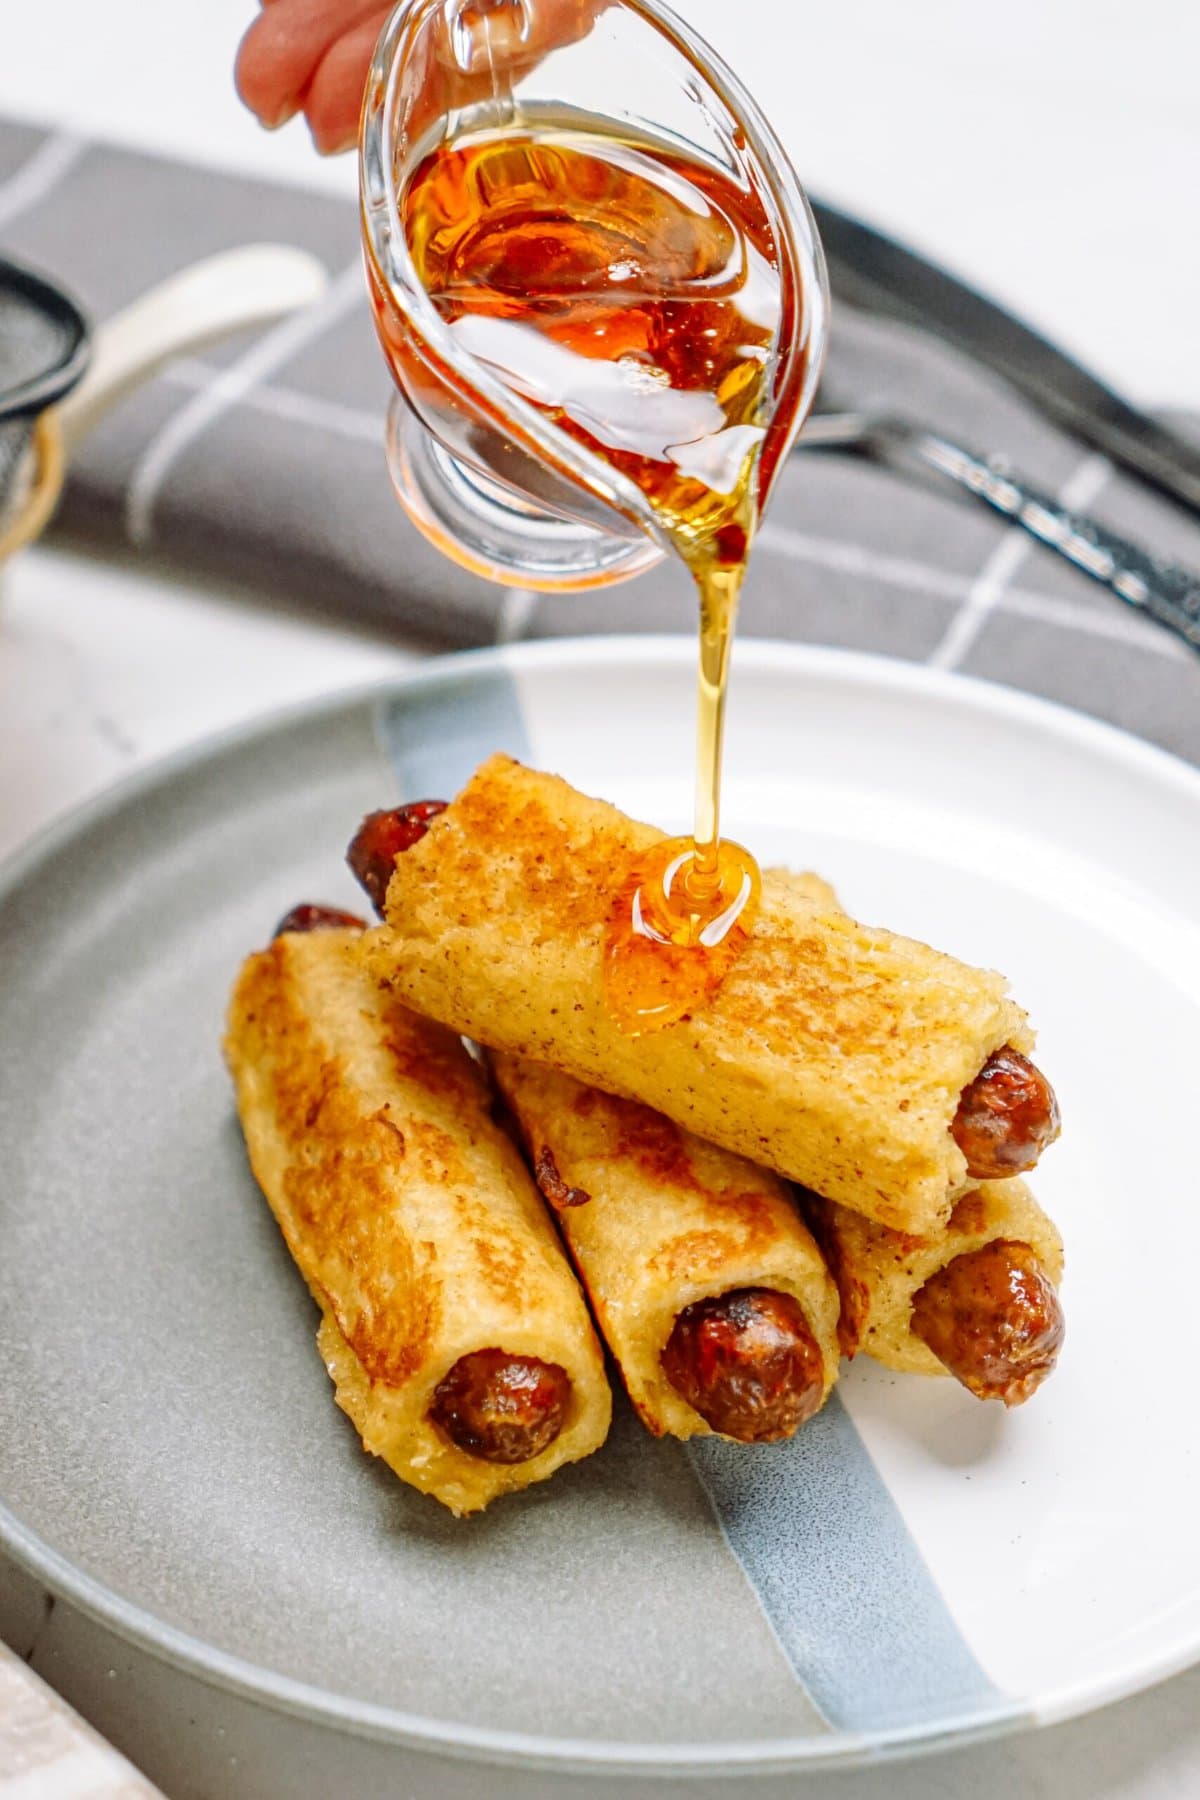 A person is drizzling syrup on a plate of breakfast pigs in a blanket.